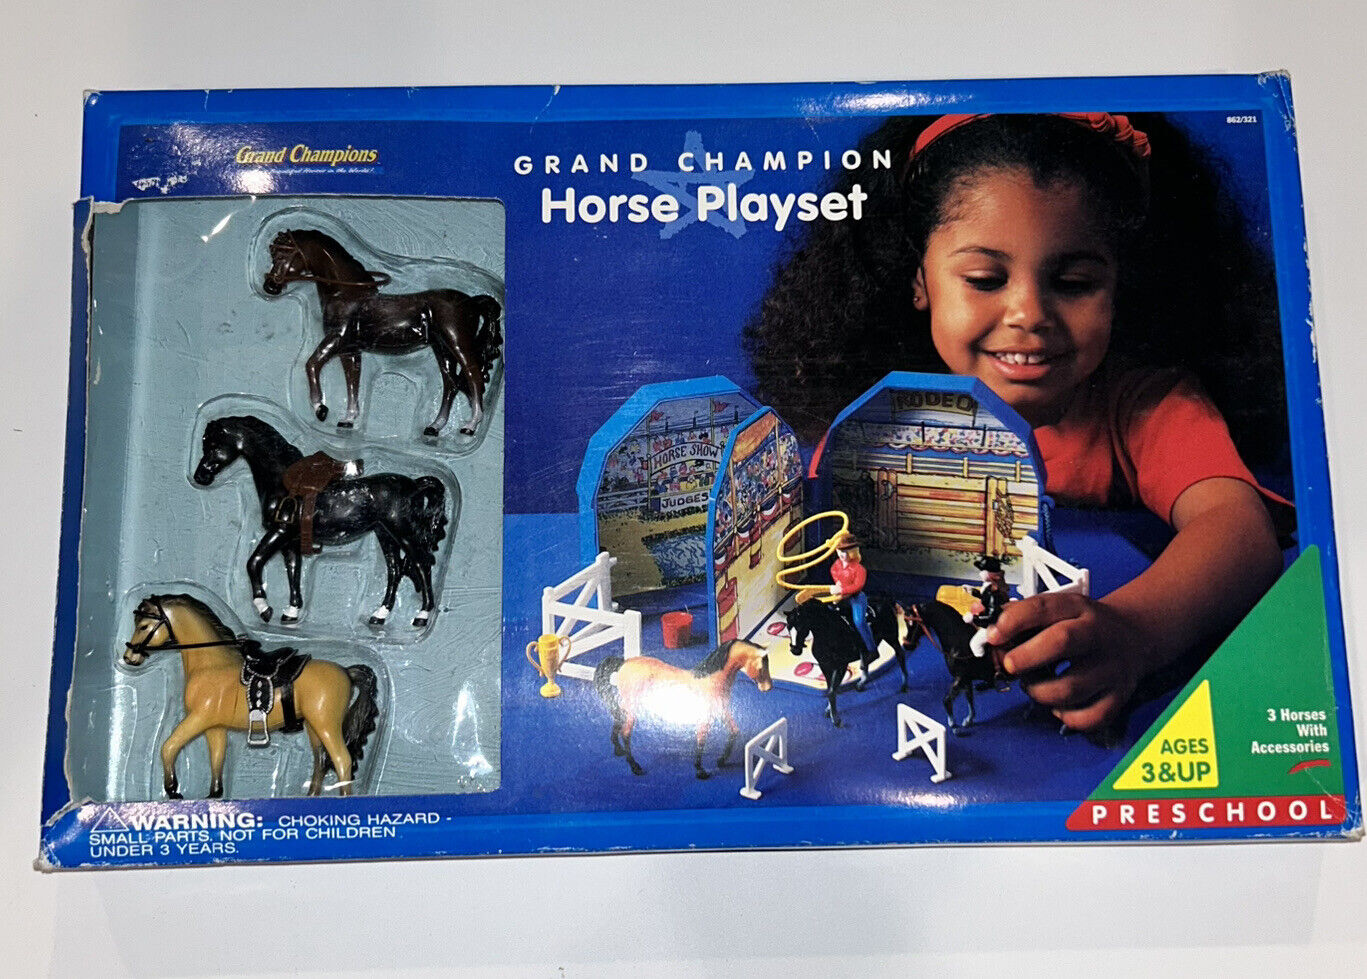 VERY Rare 1994 Grand Champions Horse Show Rodeo Playset Compact New In Box